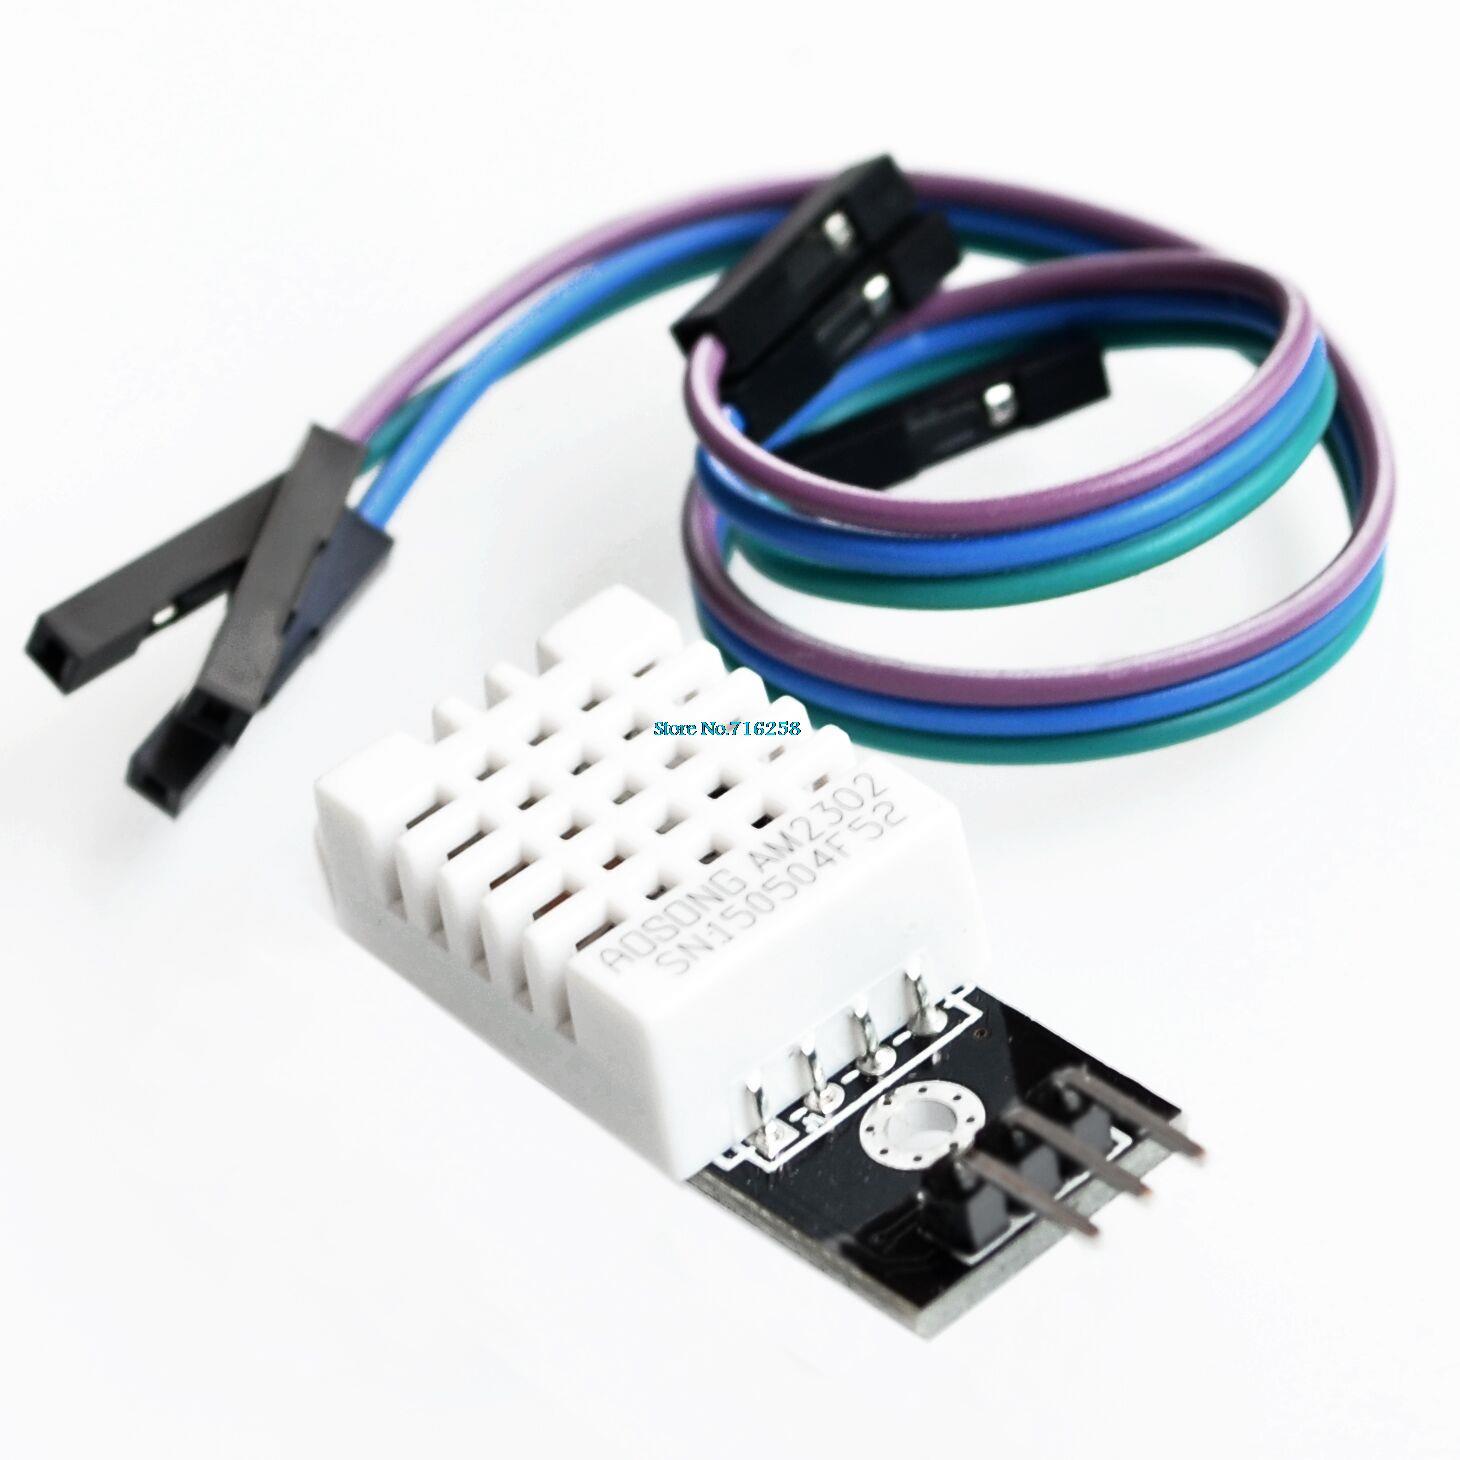 10sets DHT22 Digital Temperature and Humidity Sensor AM2302 Module+PCB with Cable    Dropshipping